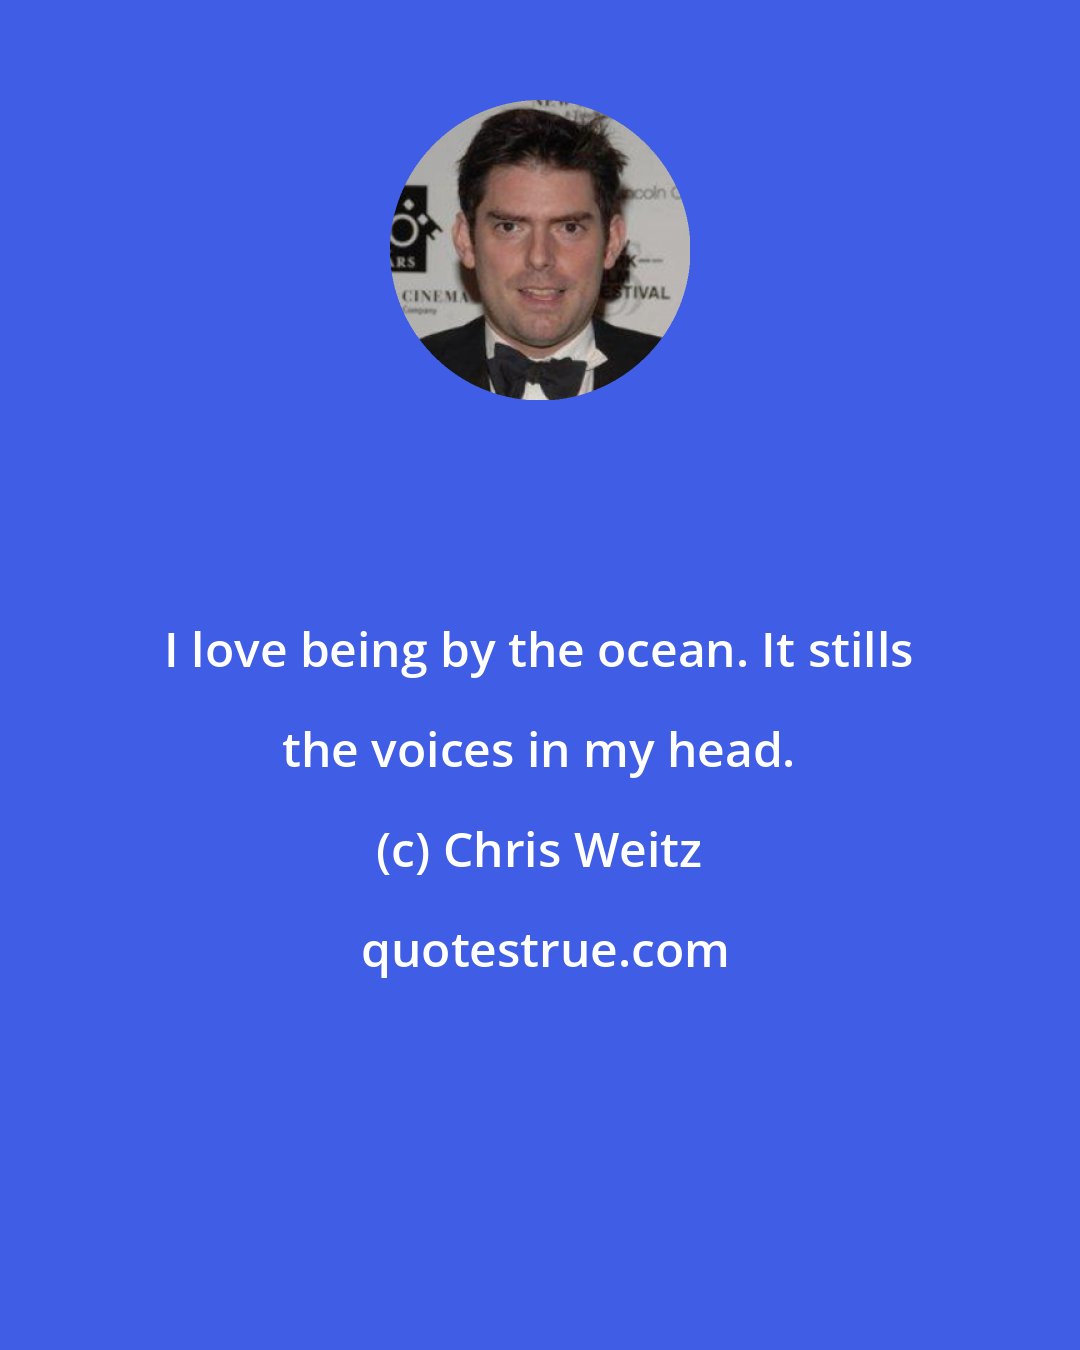 Chris Weitz: I love being by the ocean. It stills the voices in my head.